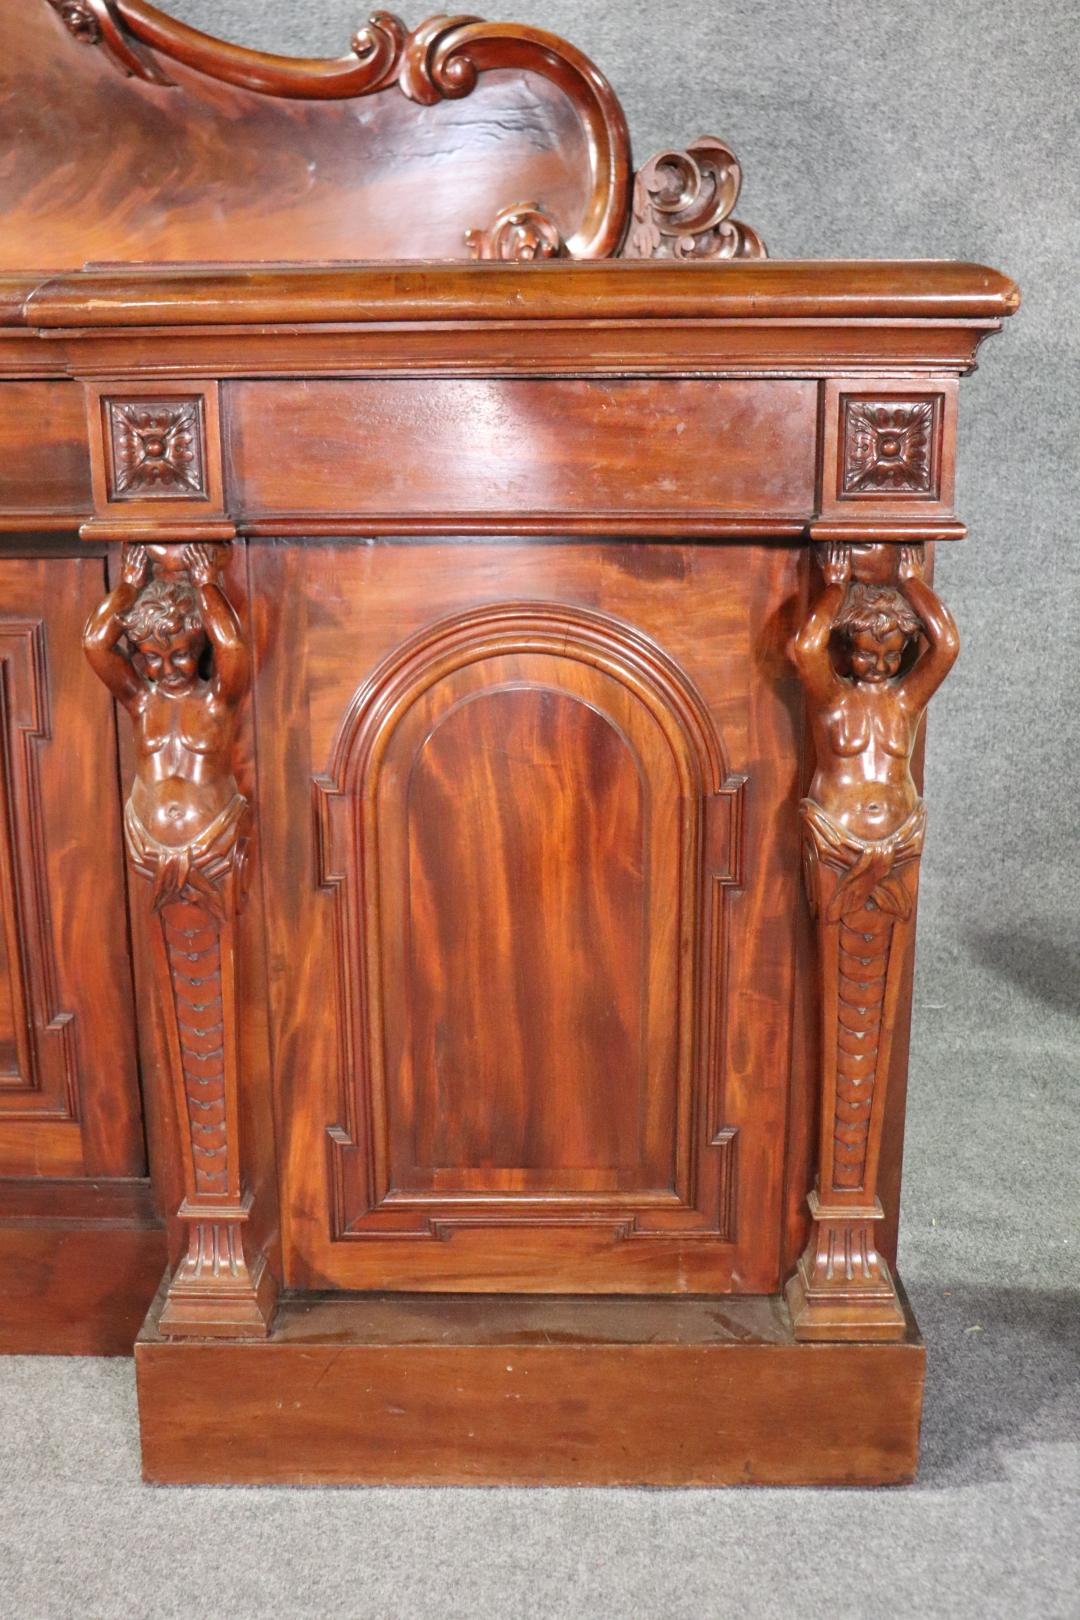 Rare Carved Full Figure Carved Solid Mahogany English Huntboard Sideboard C1870s For Sale 2